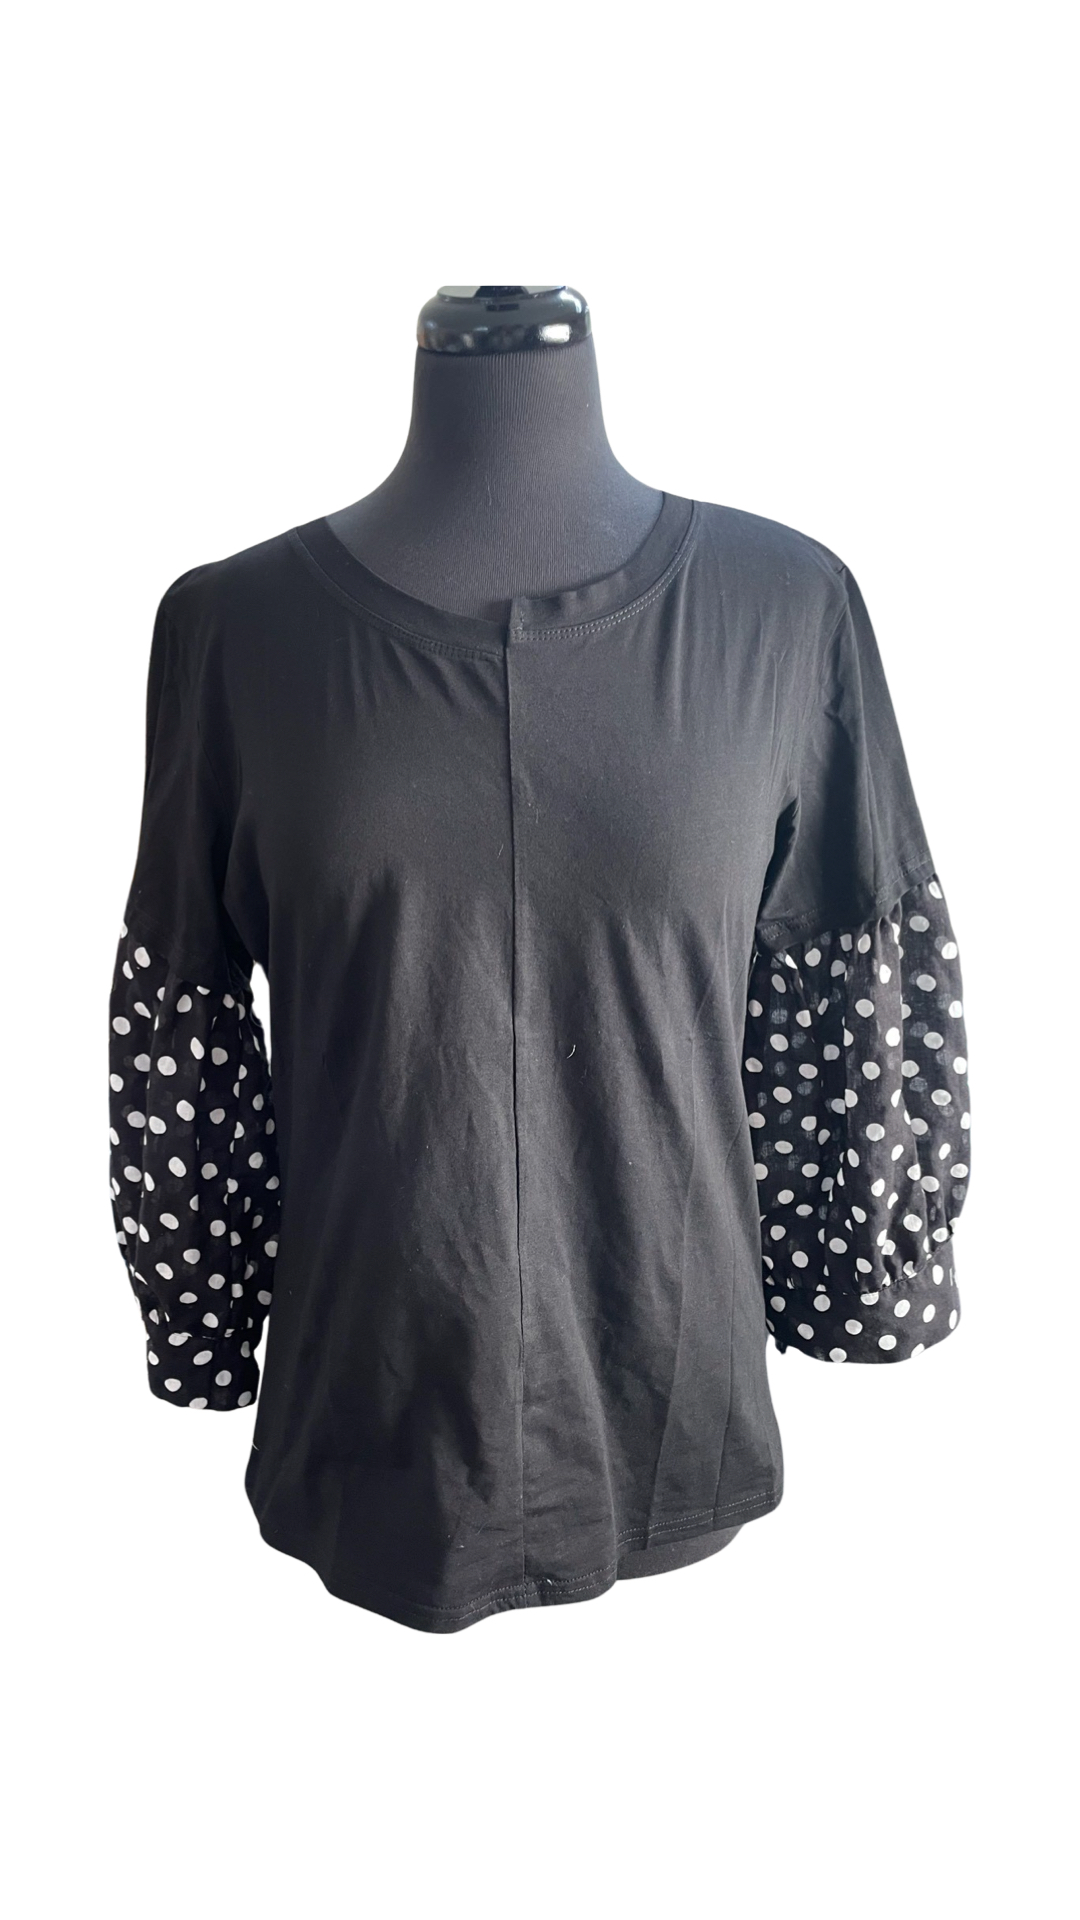 Black T – Style 4 – black with white polka dots